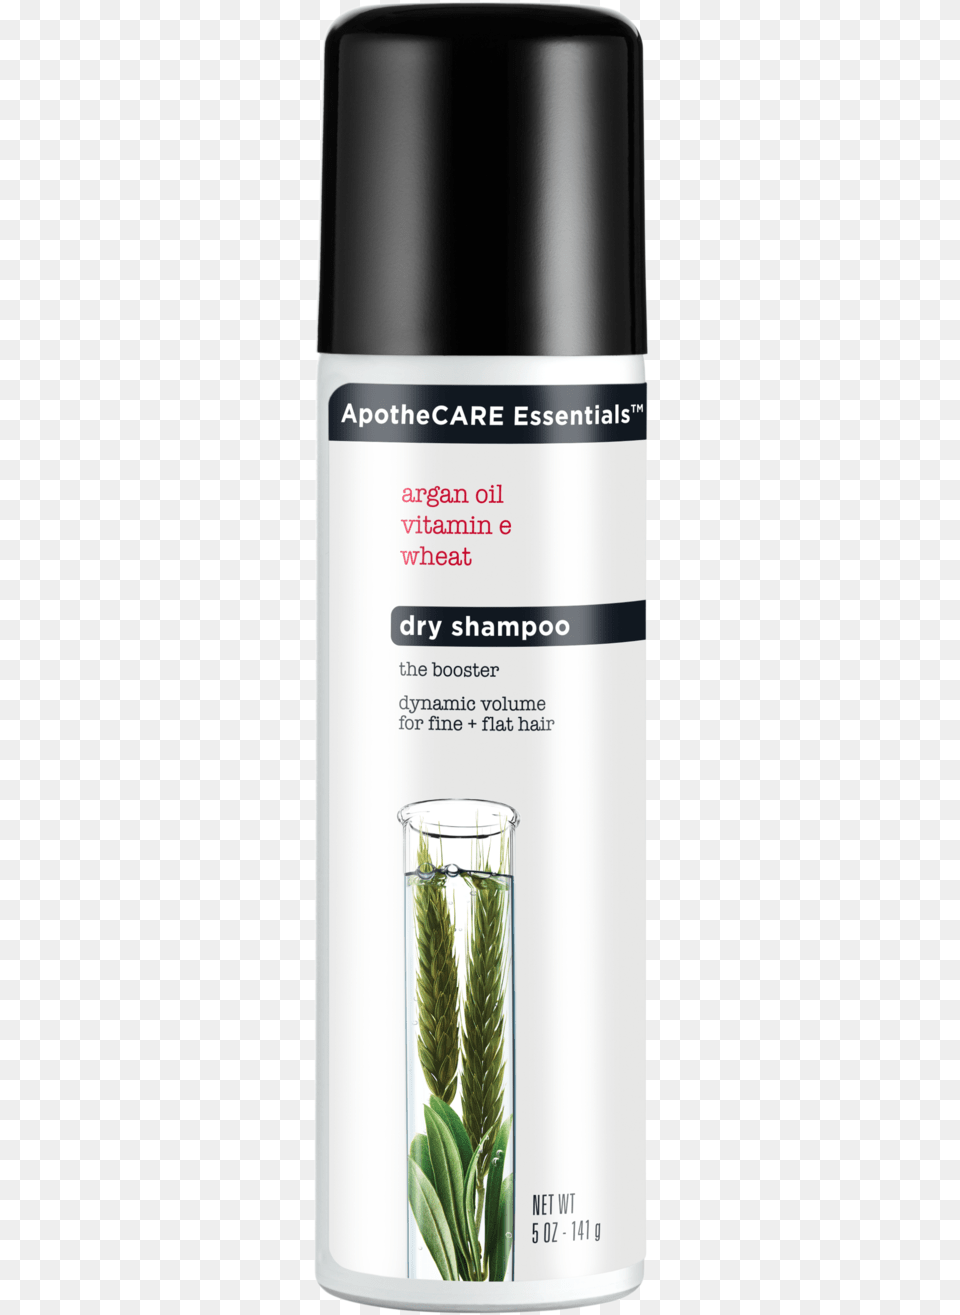 Apothecare Essentials The Booster Dry Shampoo Argan Dry Shampoo, Cosmetics Png